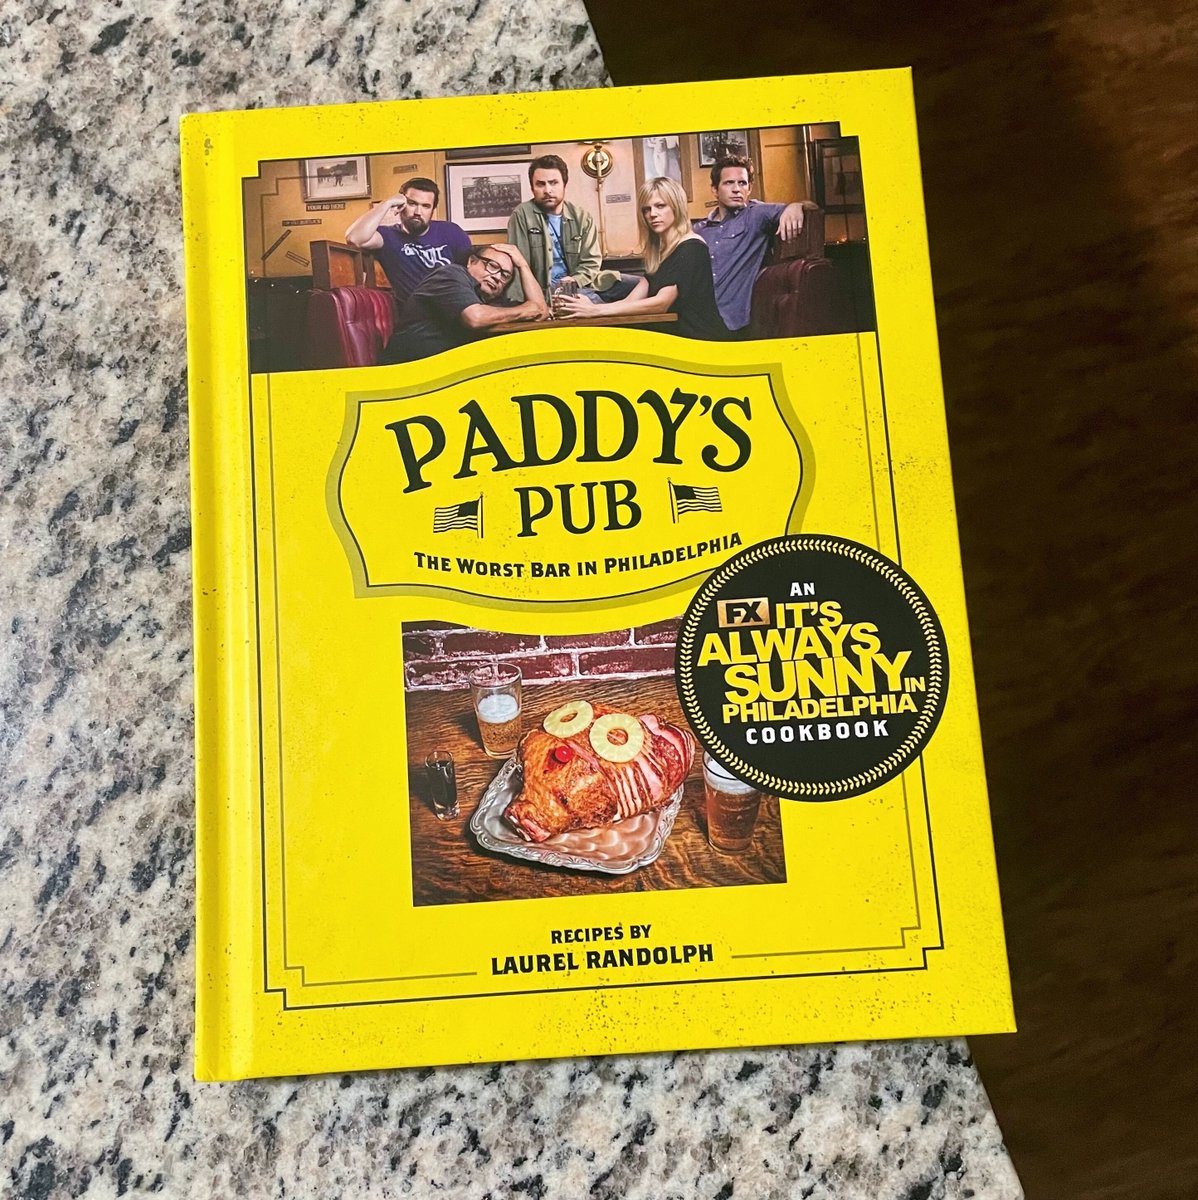 If you've ever wanted to try any of the iconic recipes from @alwayssunny, Paddy's Pub is the book for you! Grab your copy and dazzle your friends with Milk Steak (raw jellybeans on the side) or Rum Ham today.